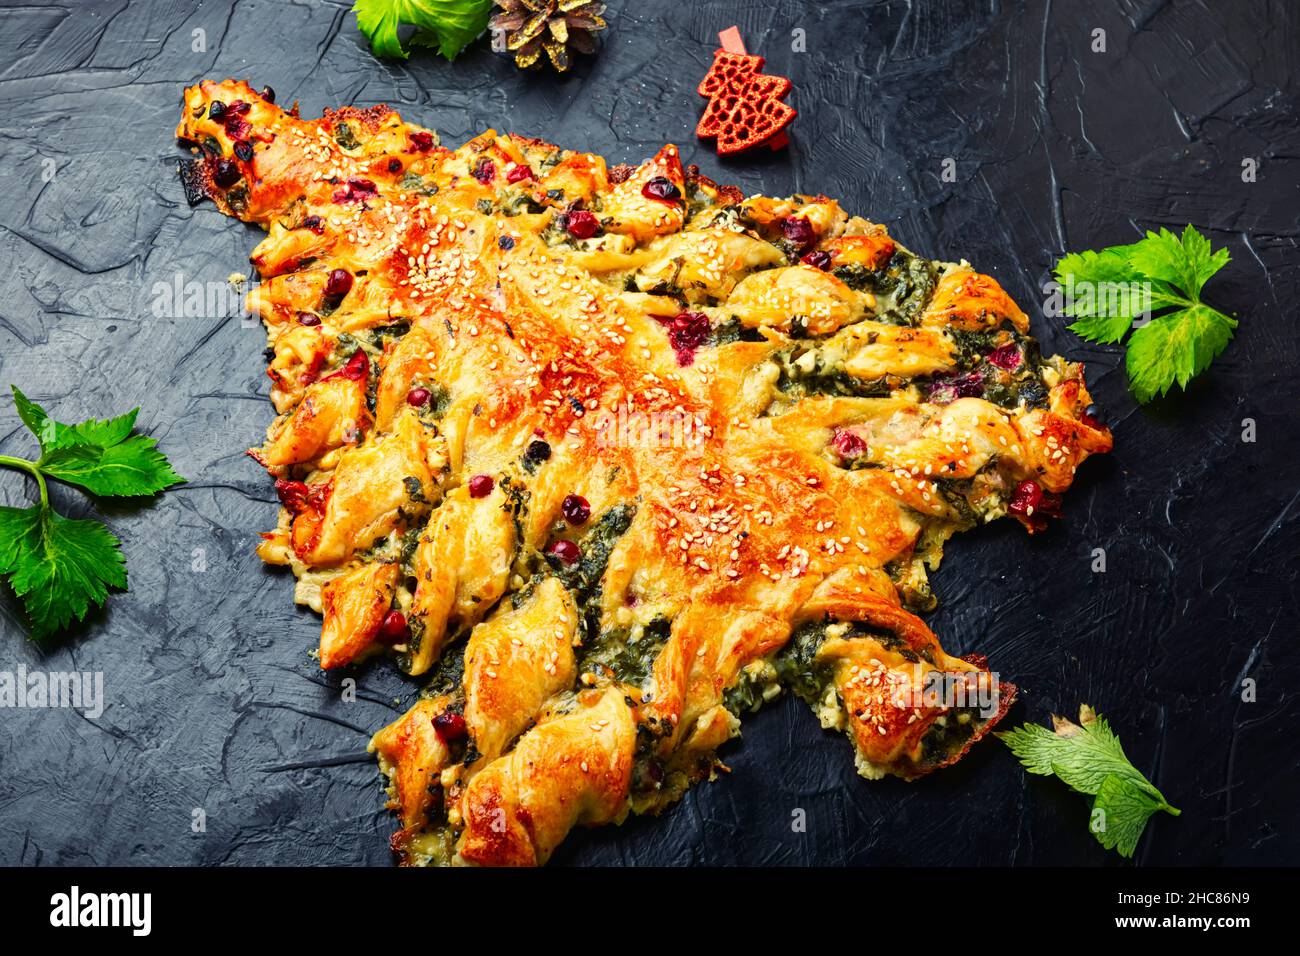 Vegetarian spinach pie for Christmas. Christmas cake and Christmas tree decorations. Stock Photo